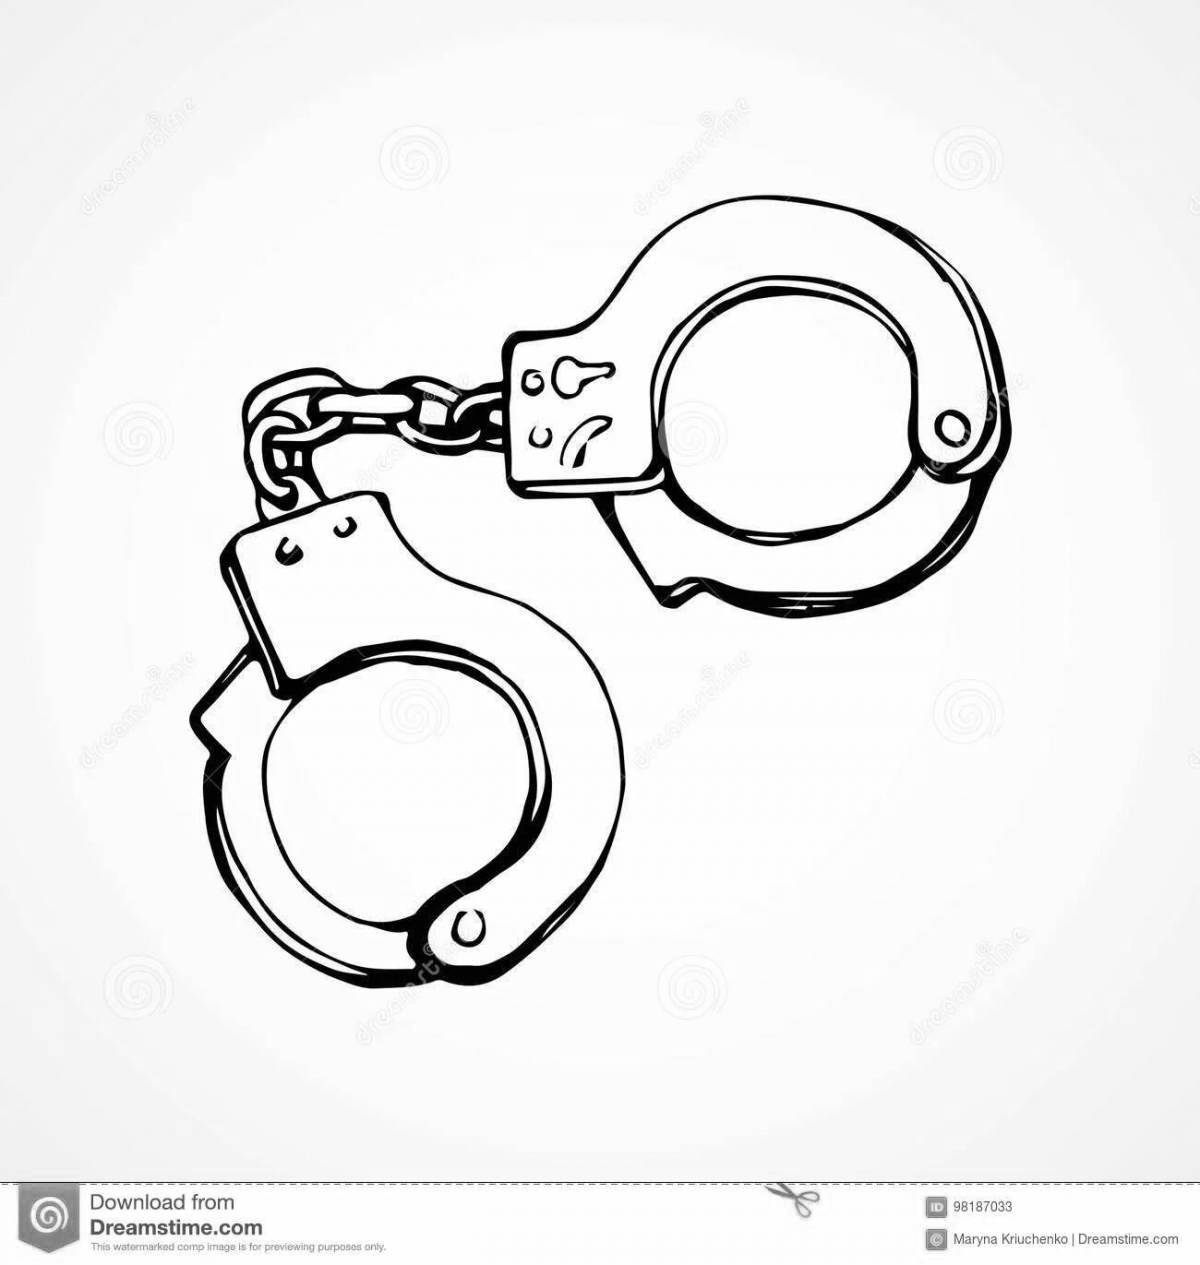 Coloring book outstanding handcuffs